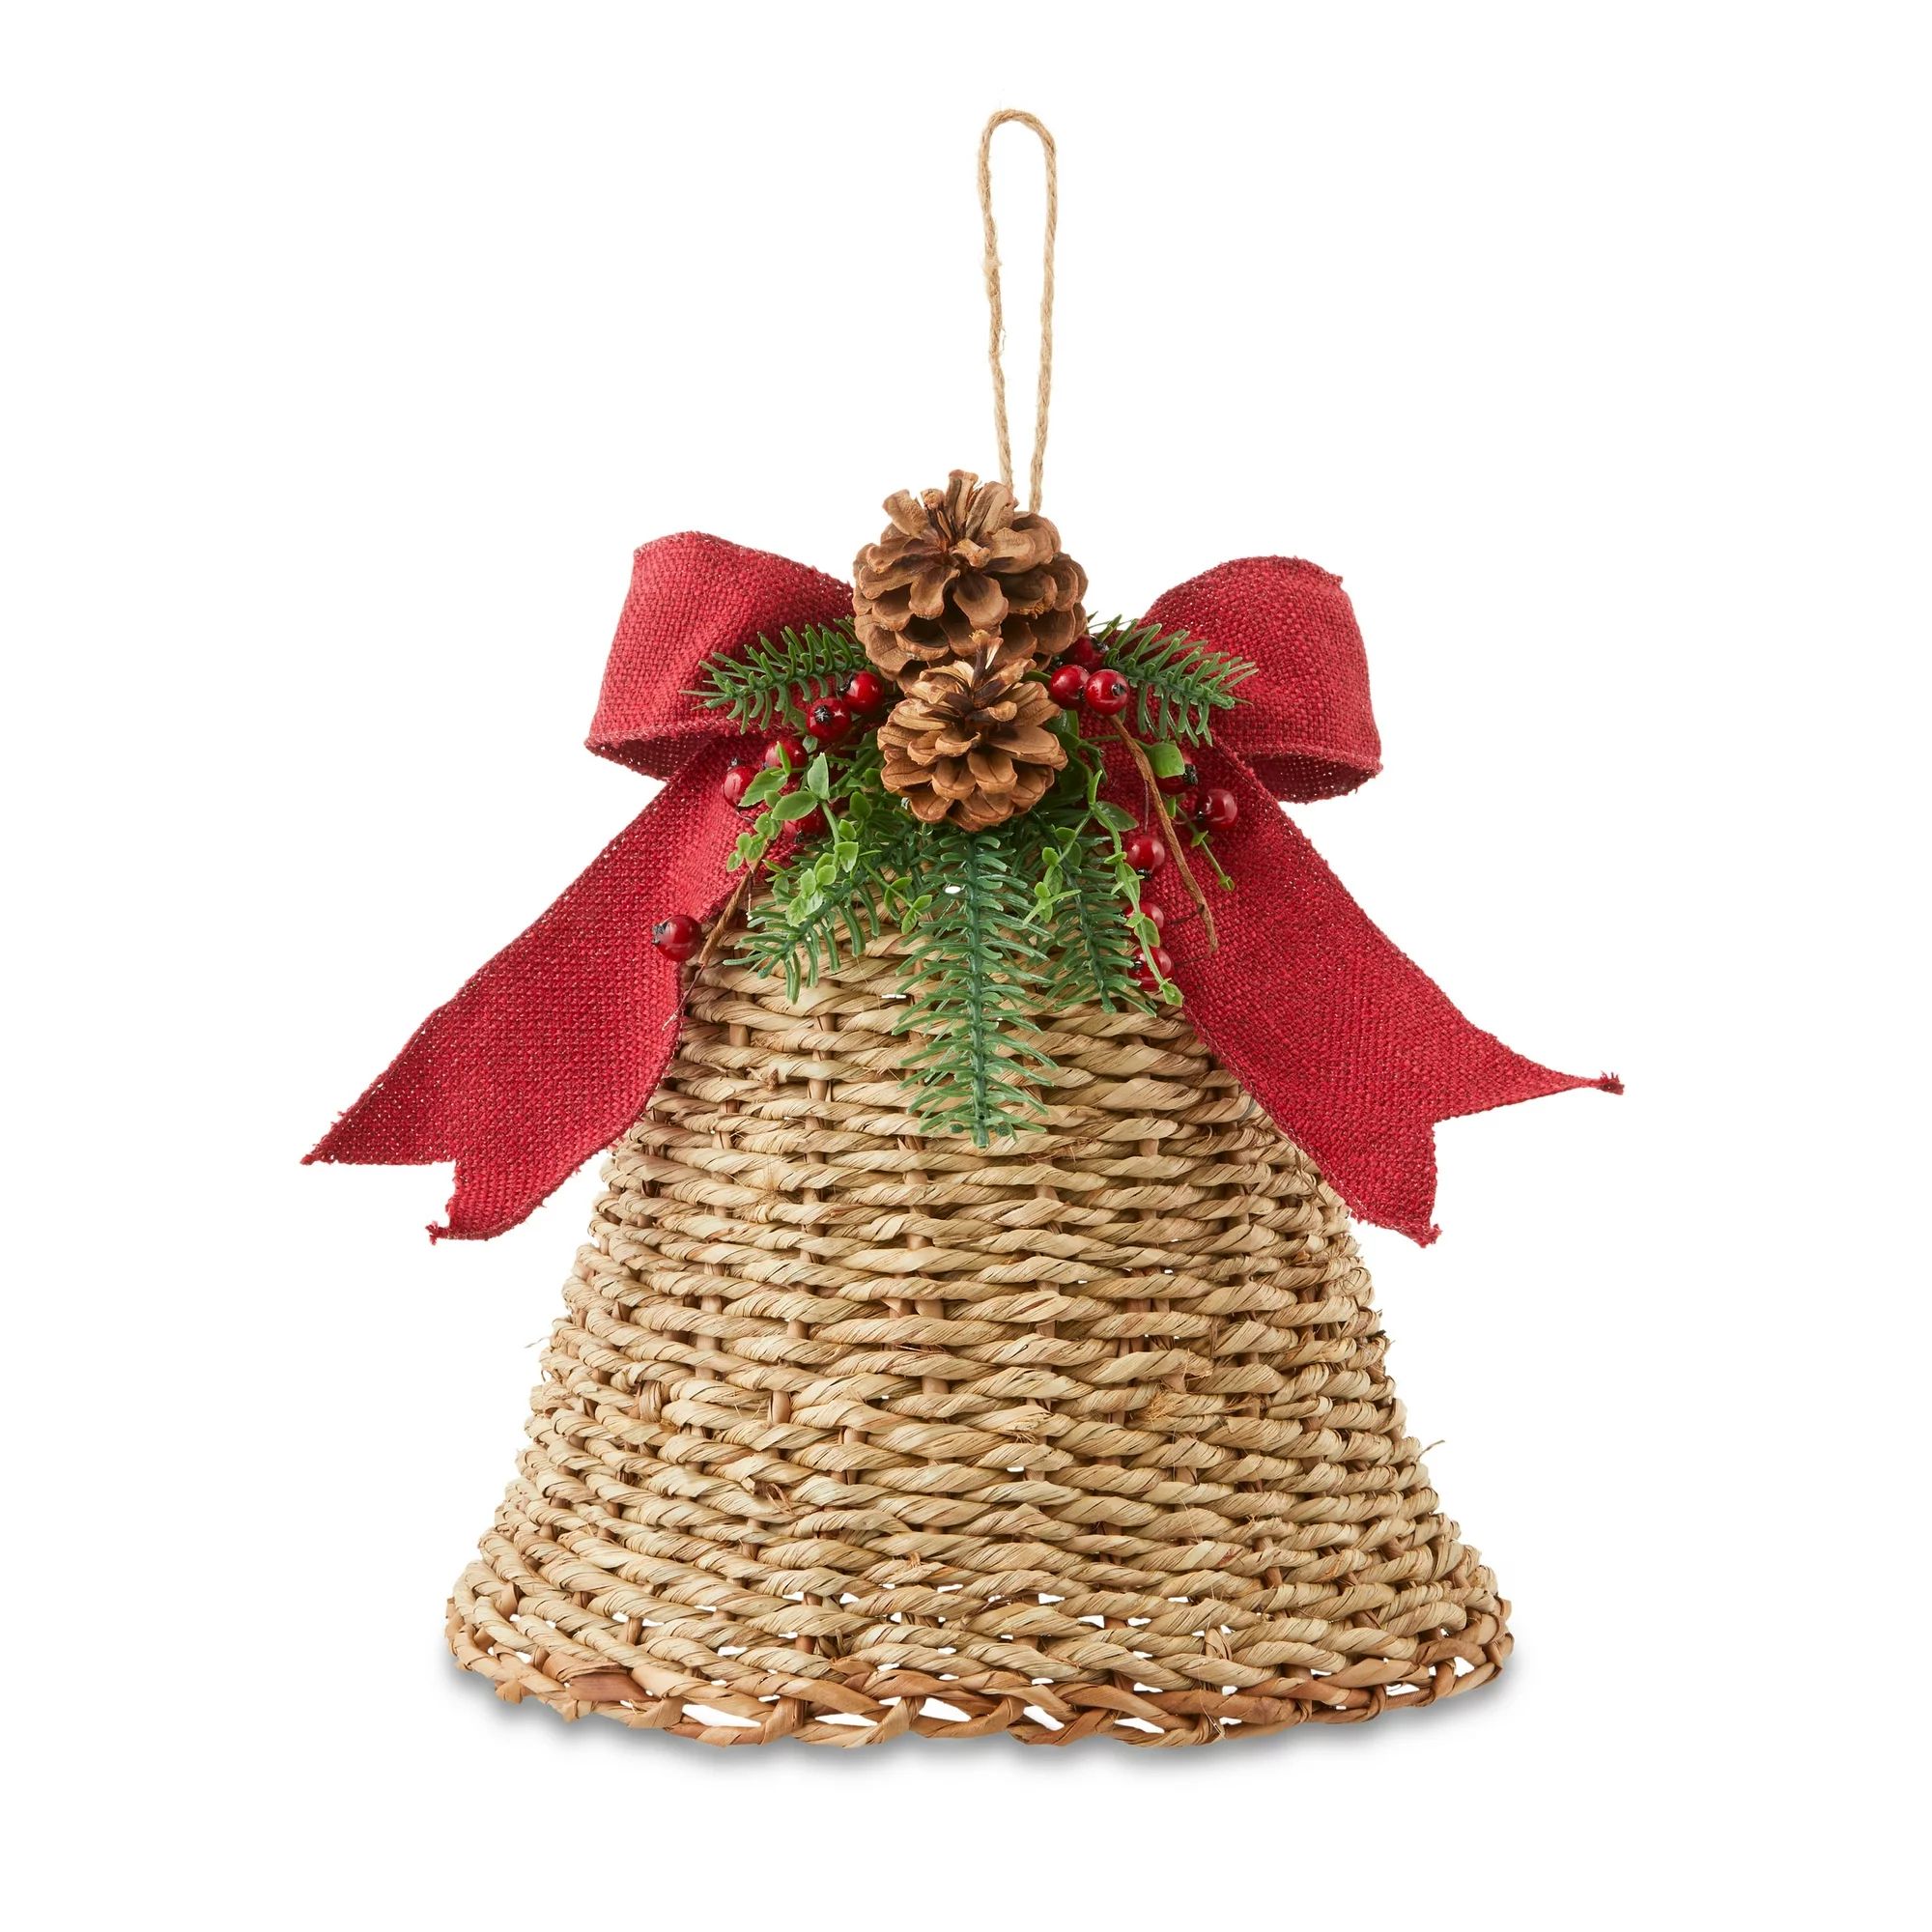 13.5 in Burlap Bell with Bow Christmas Decoration, Multi-Color, by Holiday Time | Walmart (US)